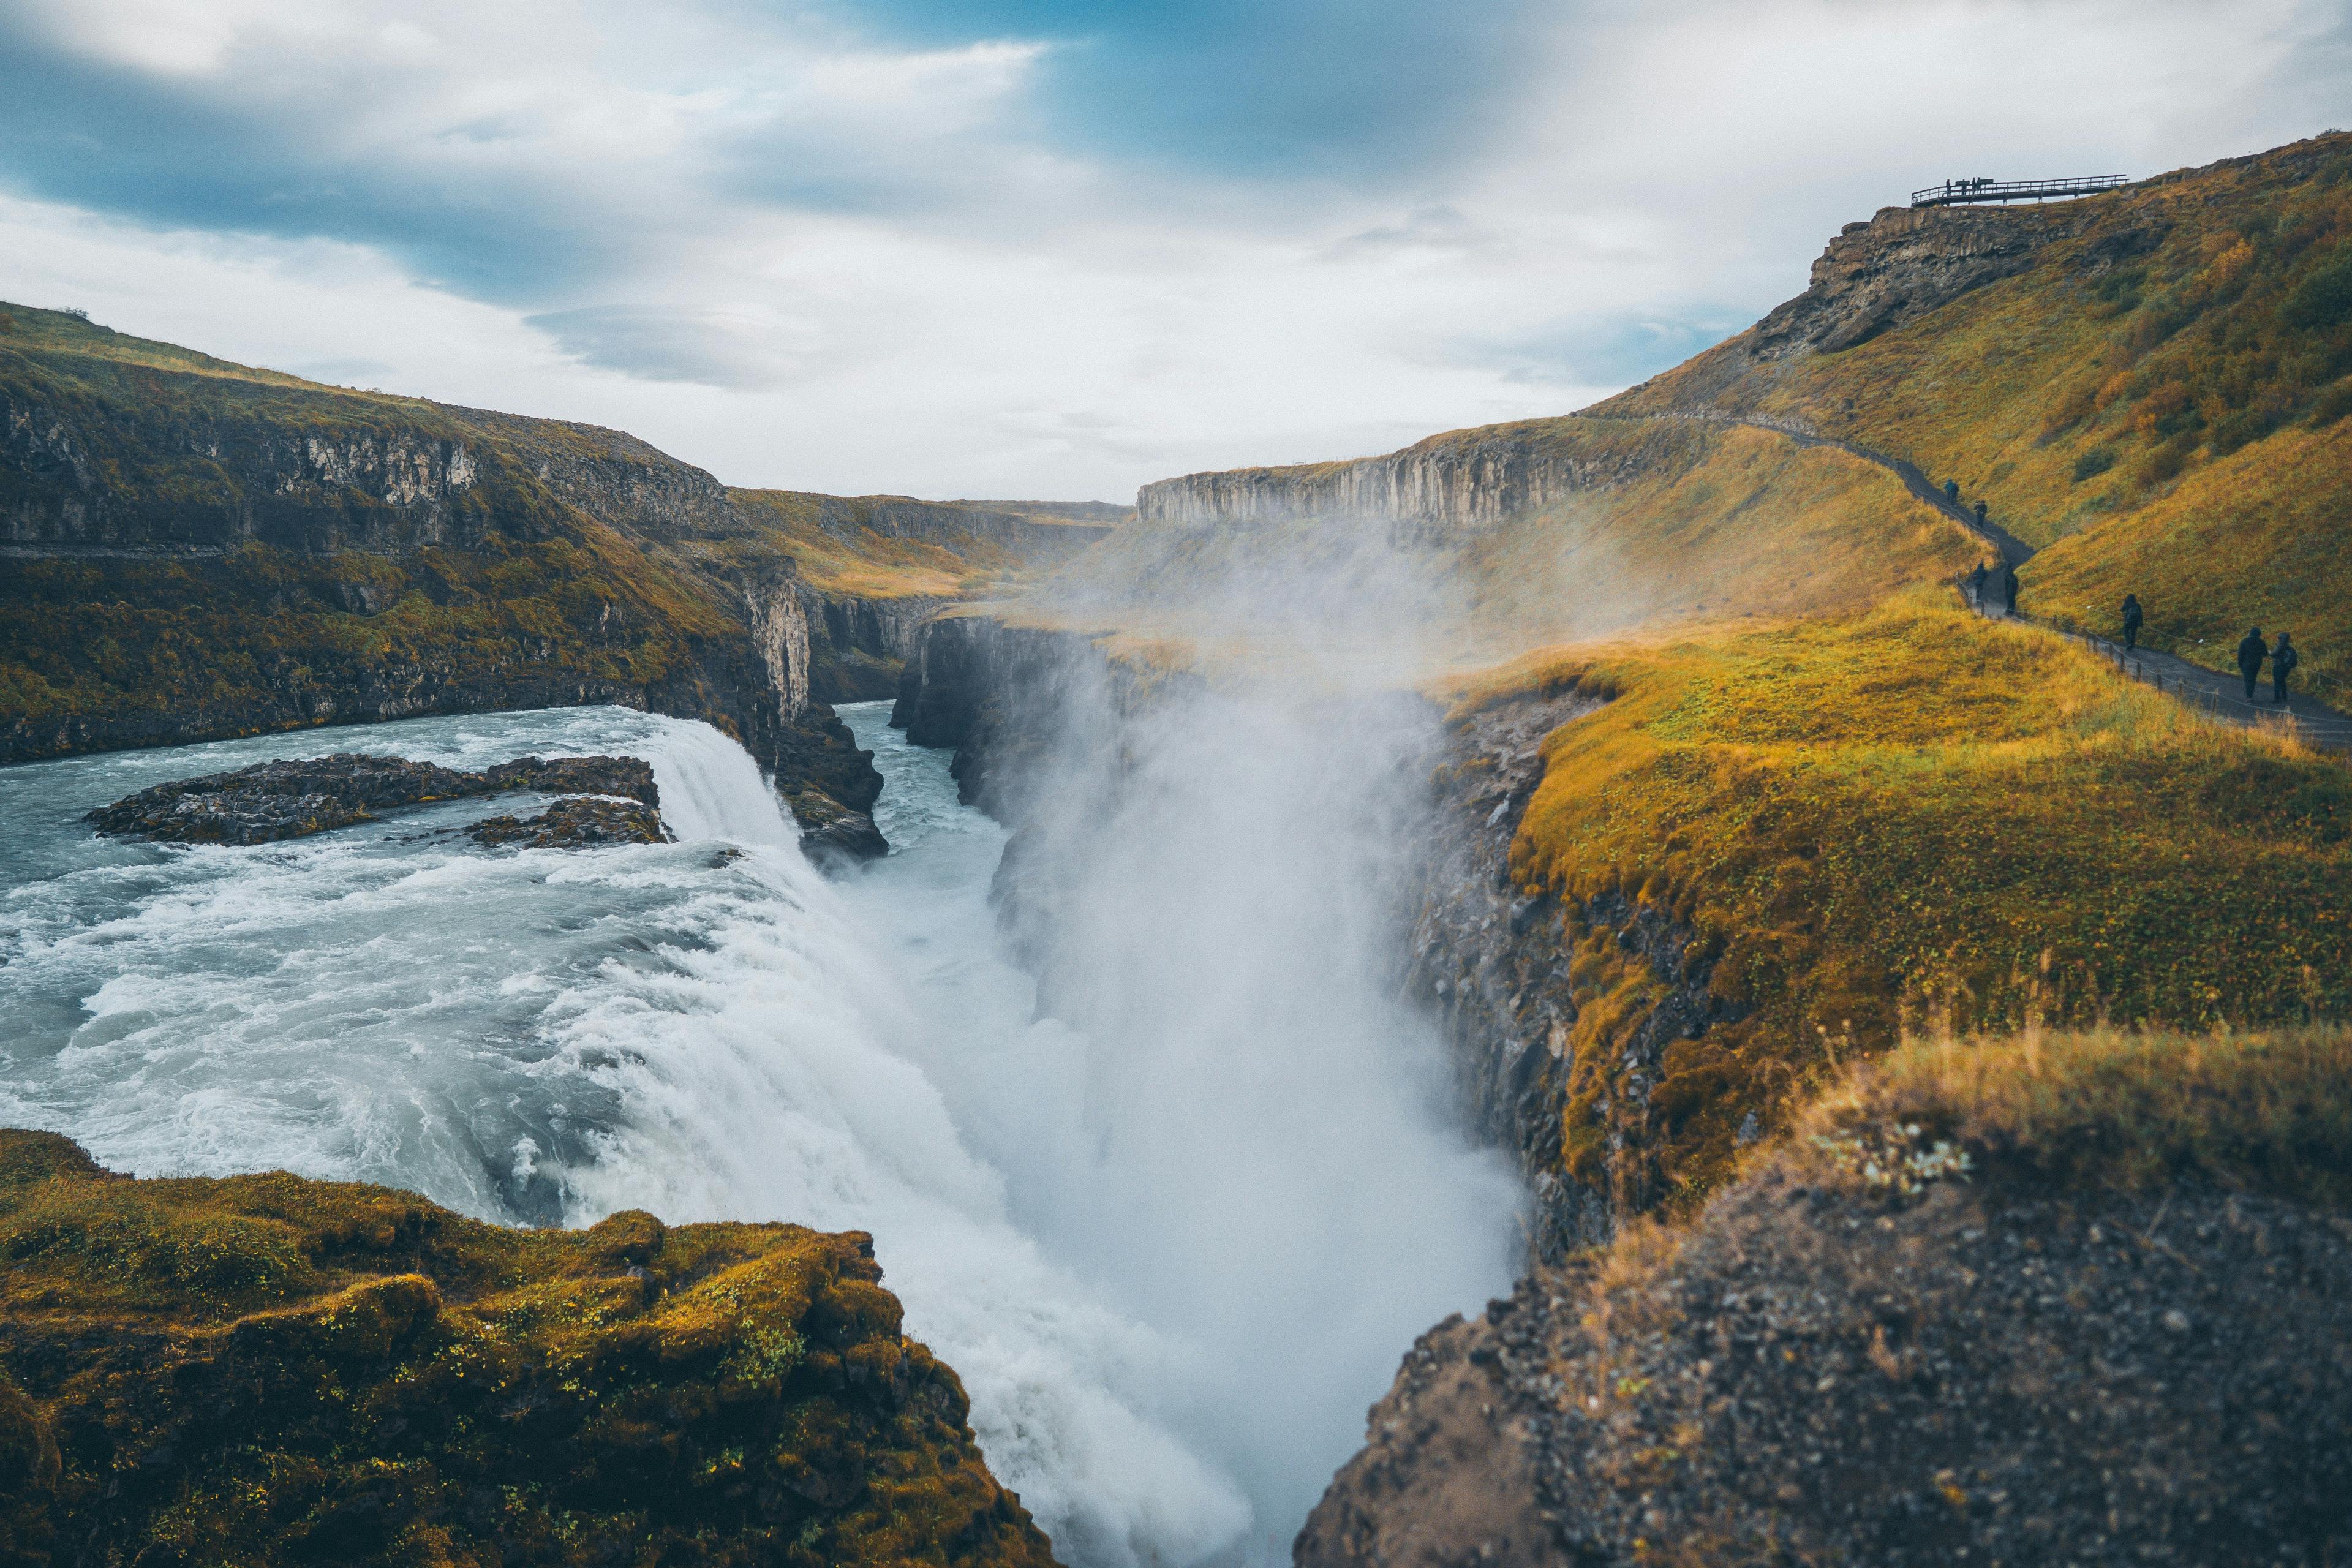 A powerful waterfall plunging into a canyon, creating a thick mist, with observers visible on a viewing platform along the verdant cliffs, a sight often sought after in the Golden Circle of Iceland.